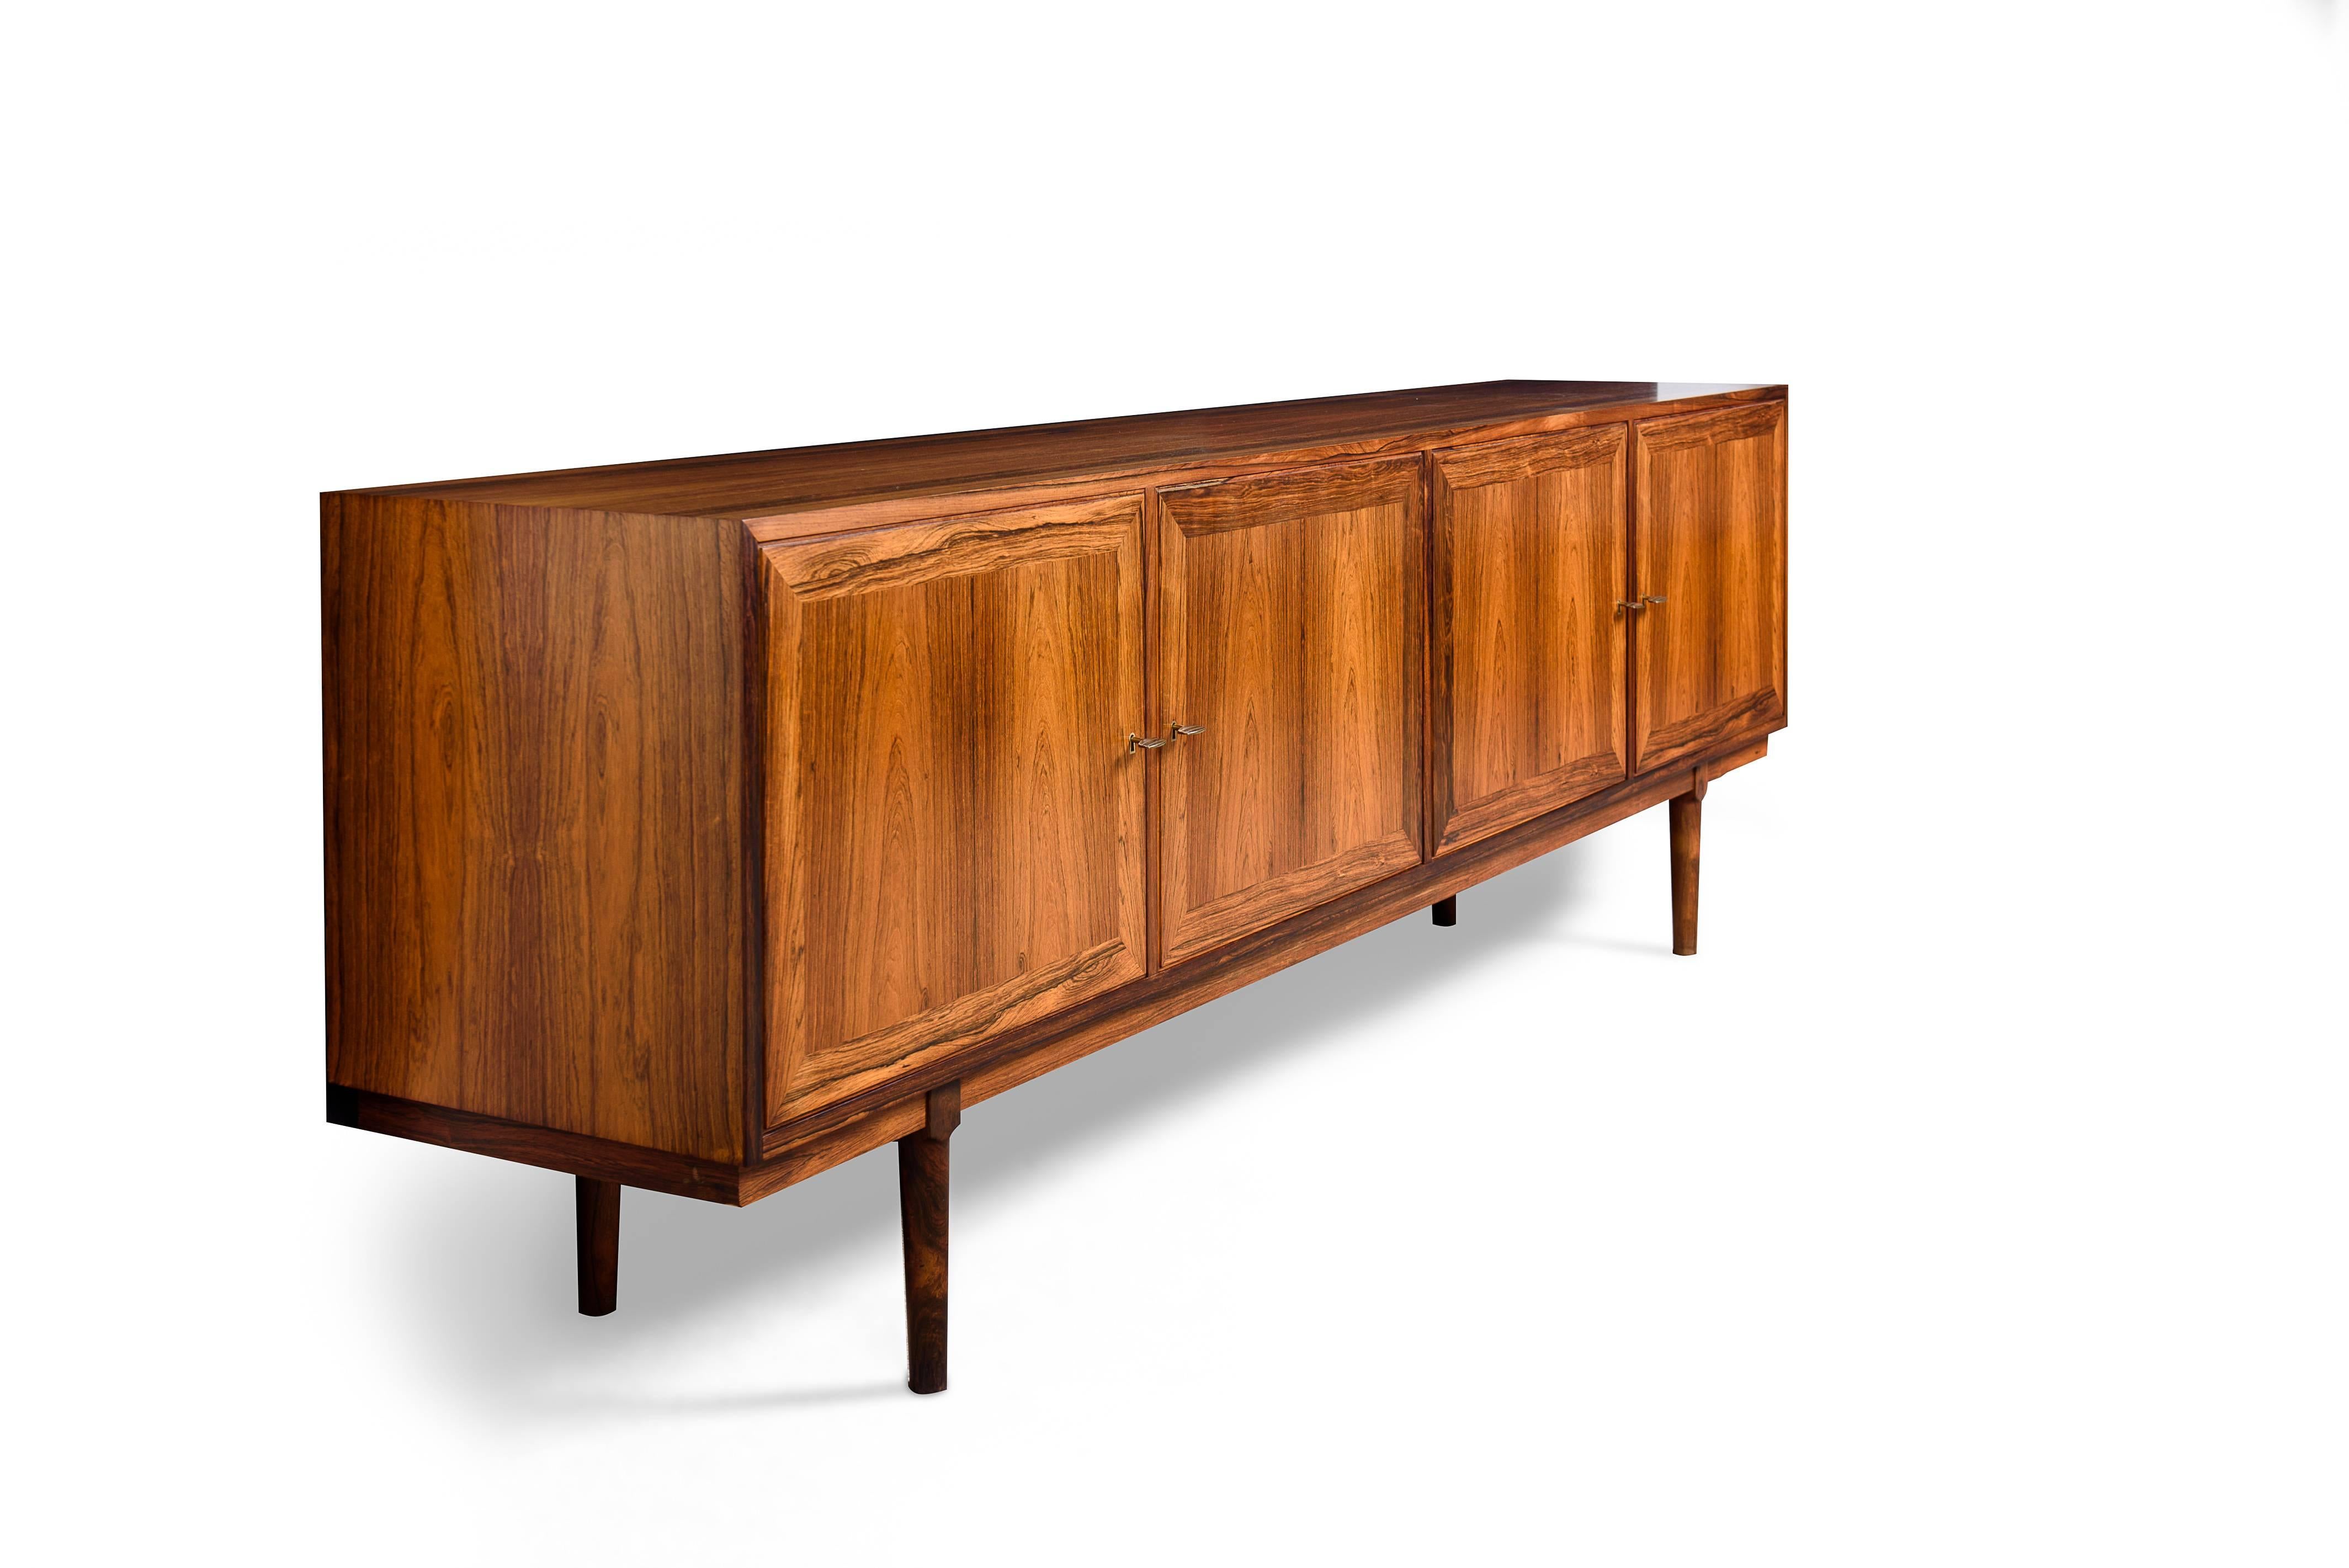 Very elegant Rio palisander sideboard designed by Arne Vodder and manufactured by Vamo A/S, Sønderborg,1960
The back of the sideboard is also in Rio palisander so it can easily be placed in the center of a room as separation.
